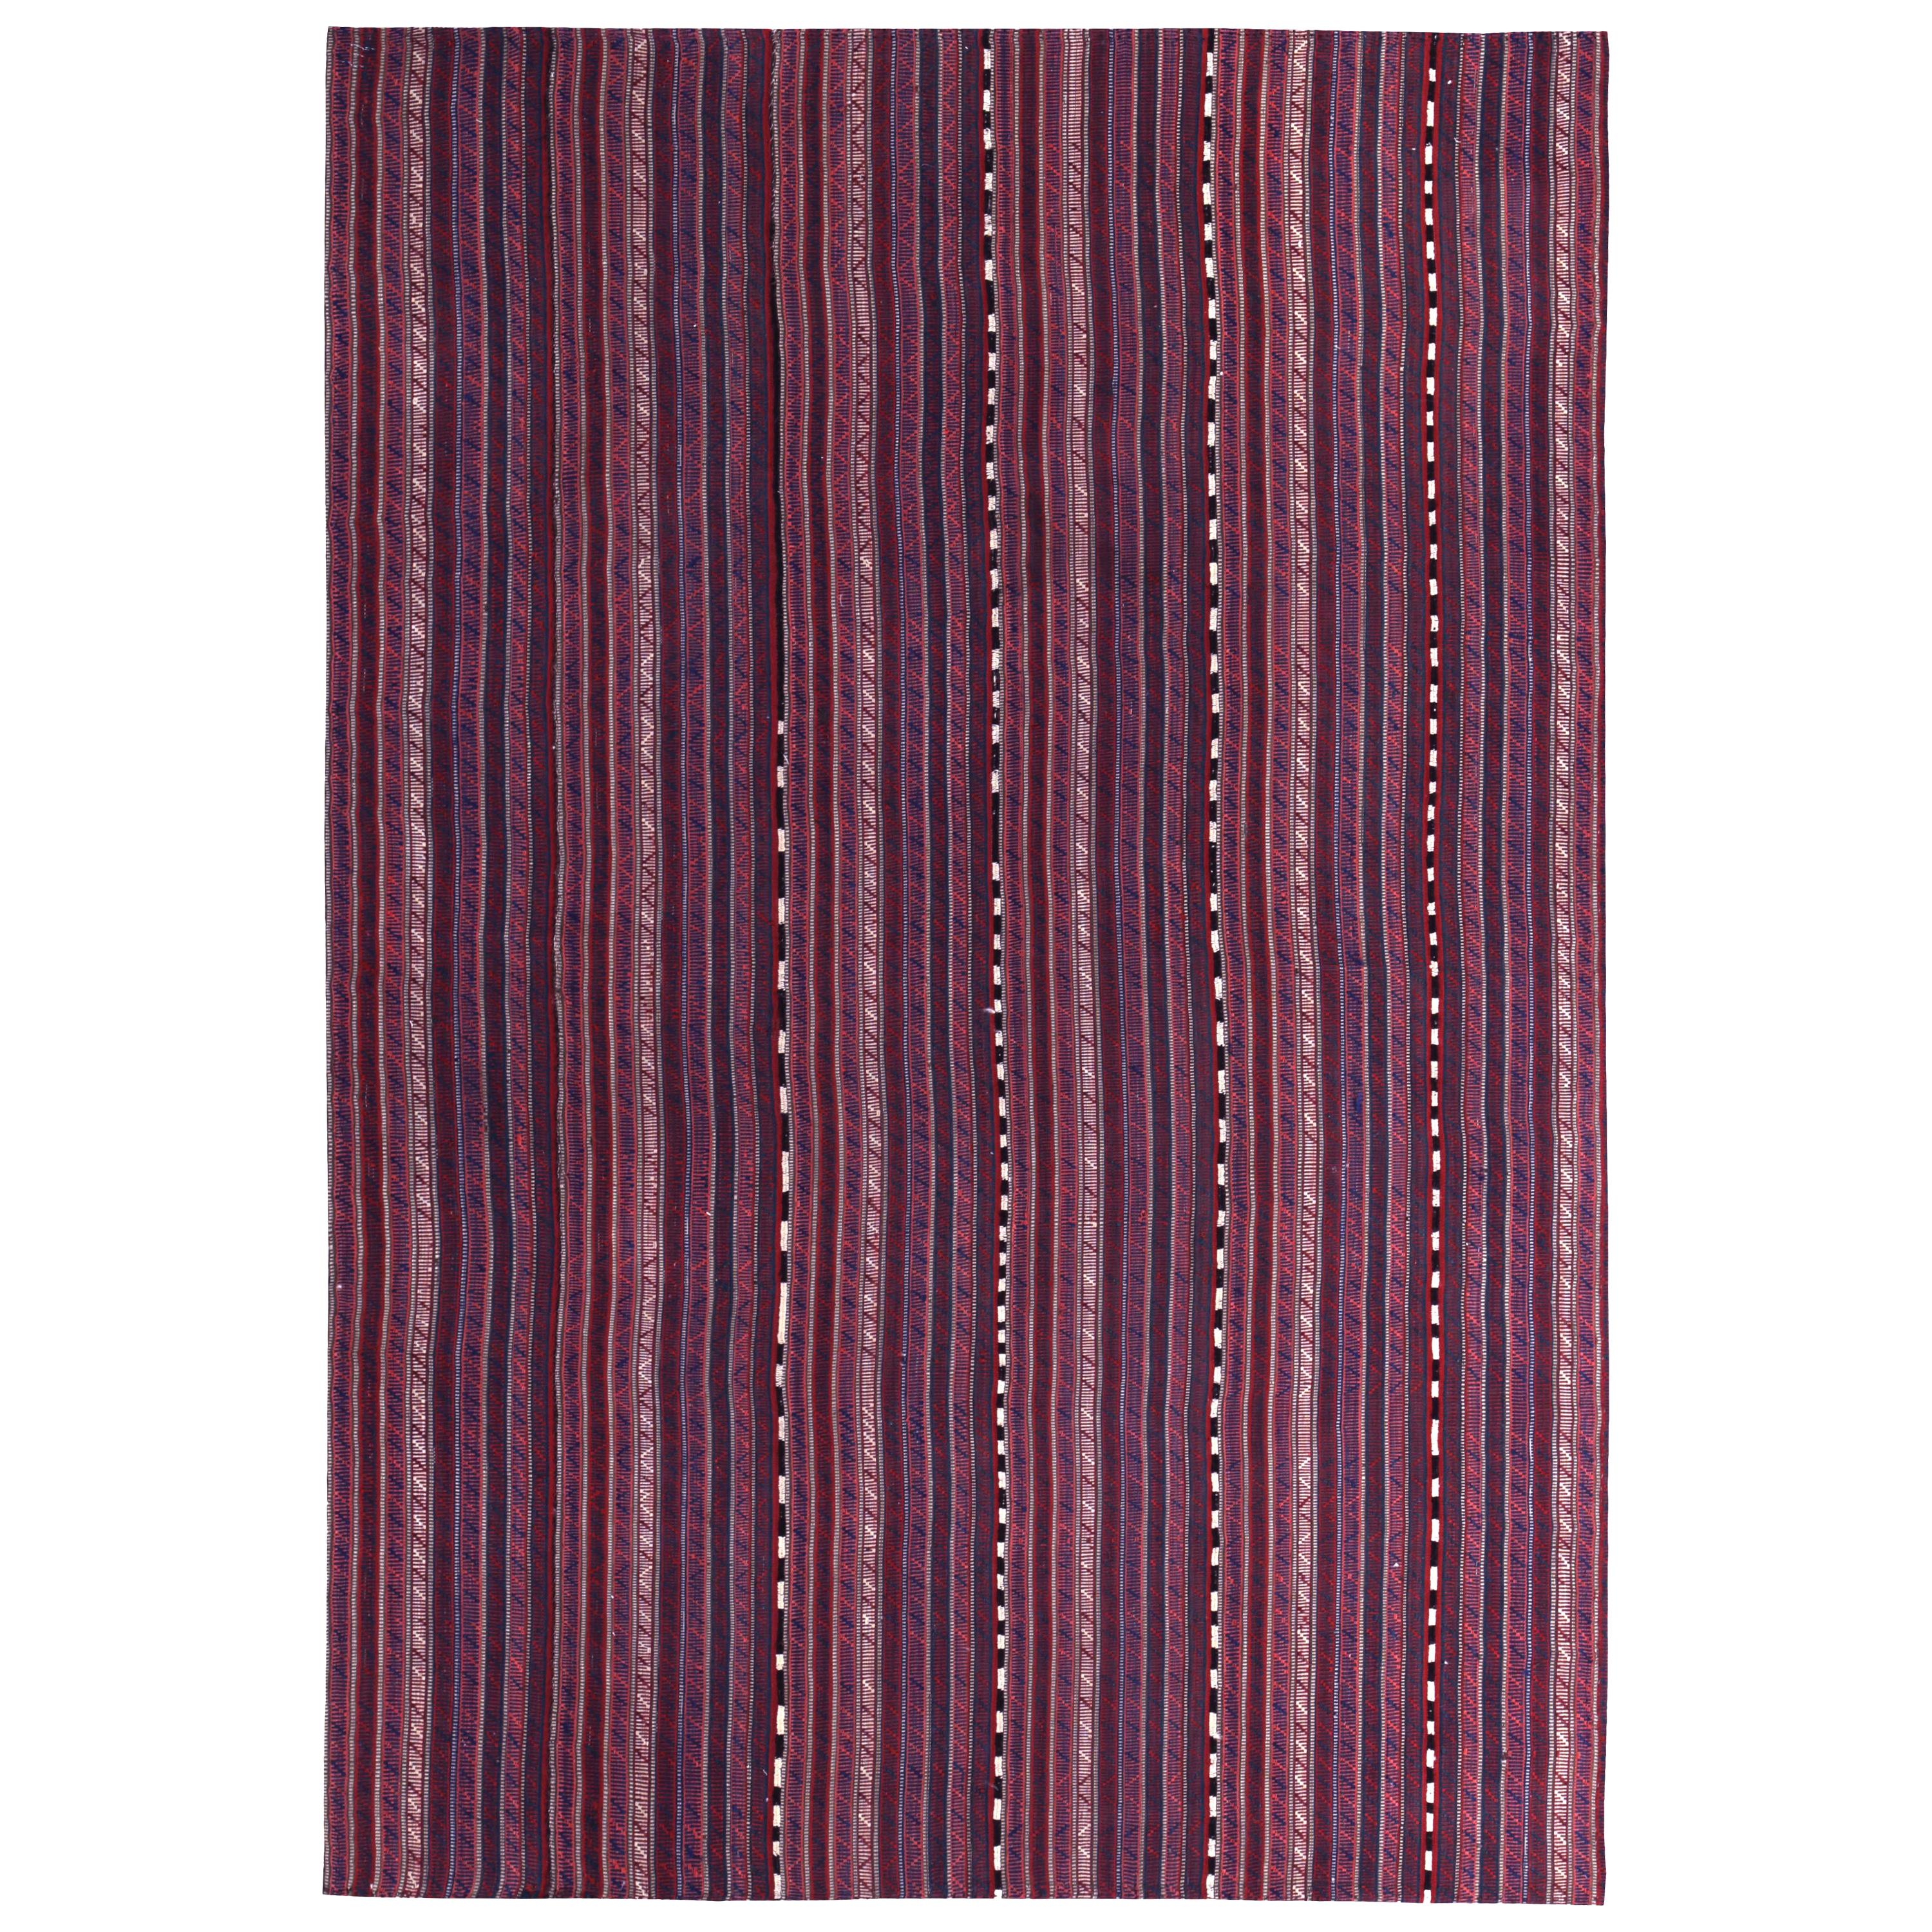 Modern Turkish Kilim Rug with Red, Pink and White Pencil Stripes